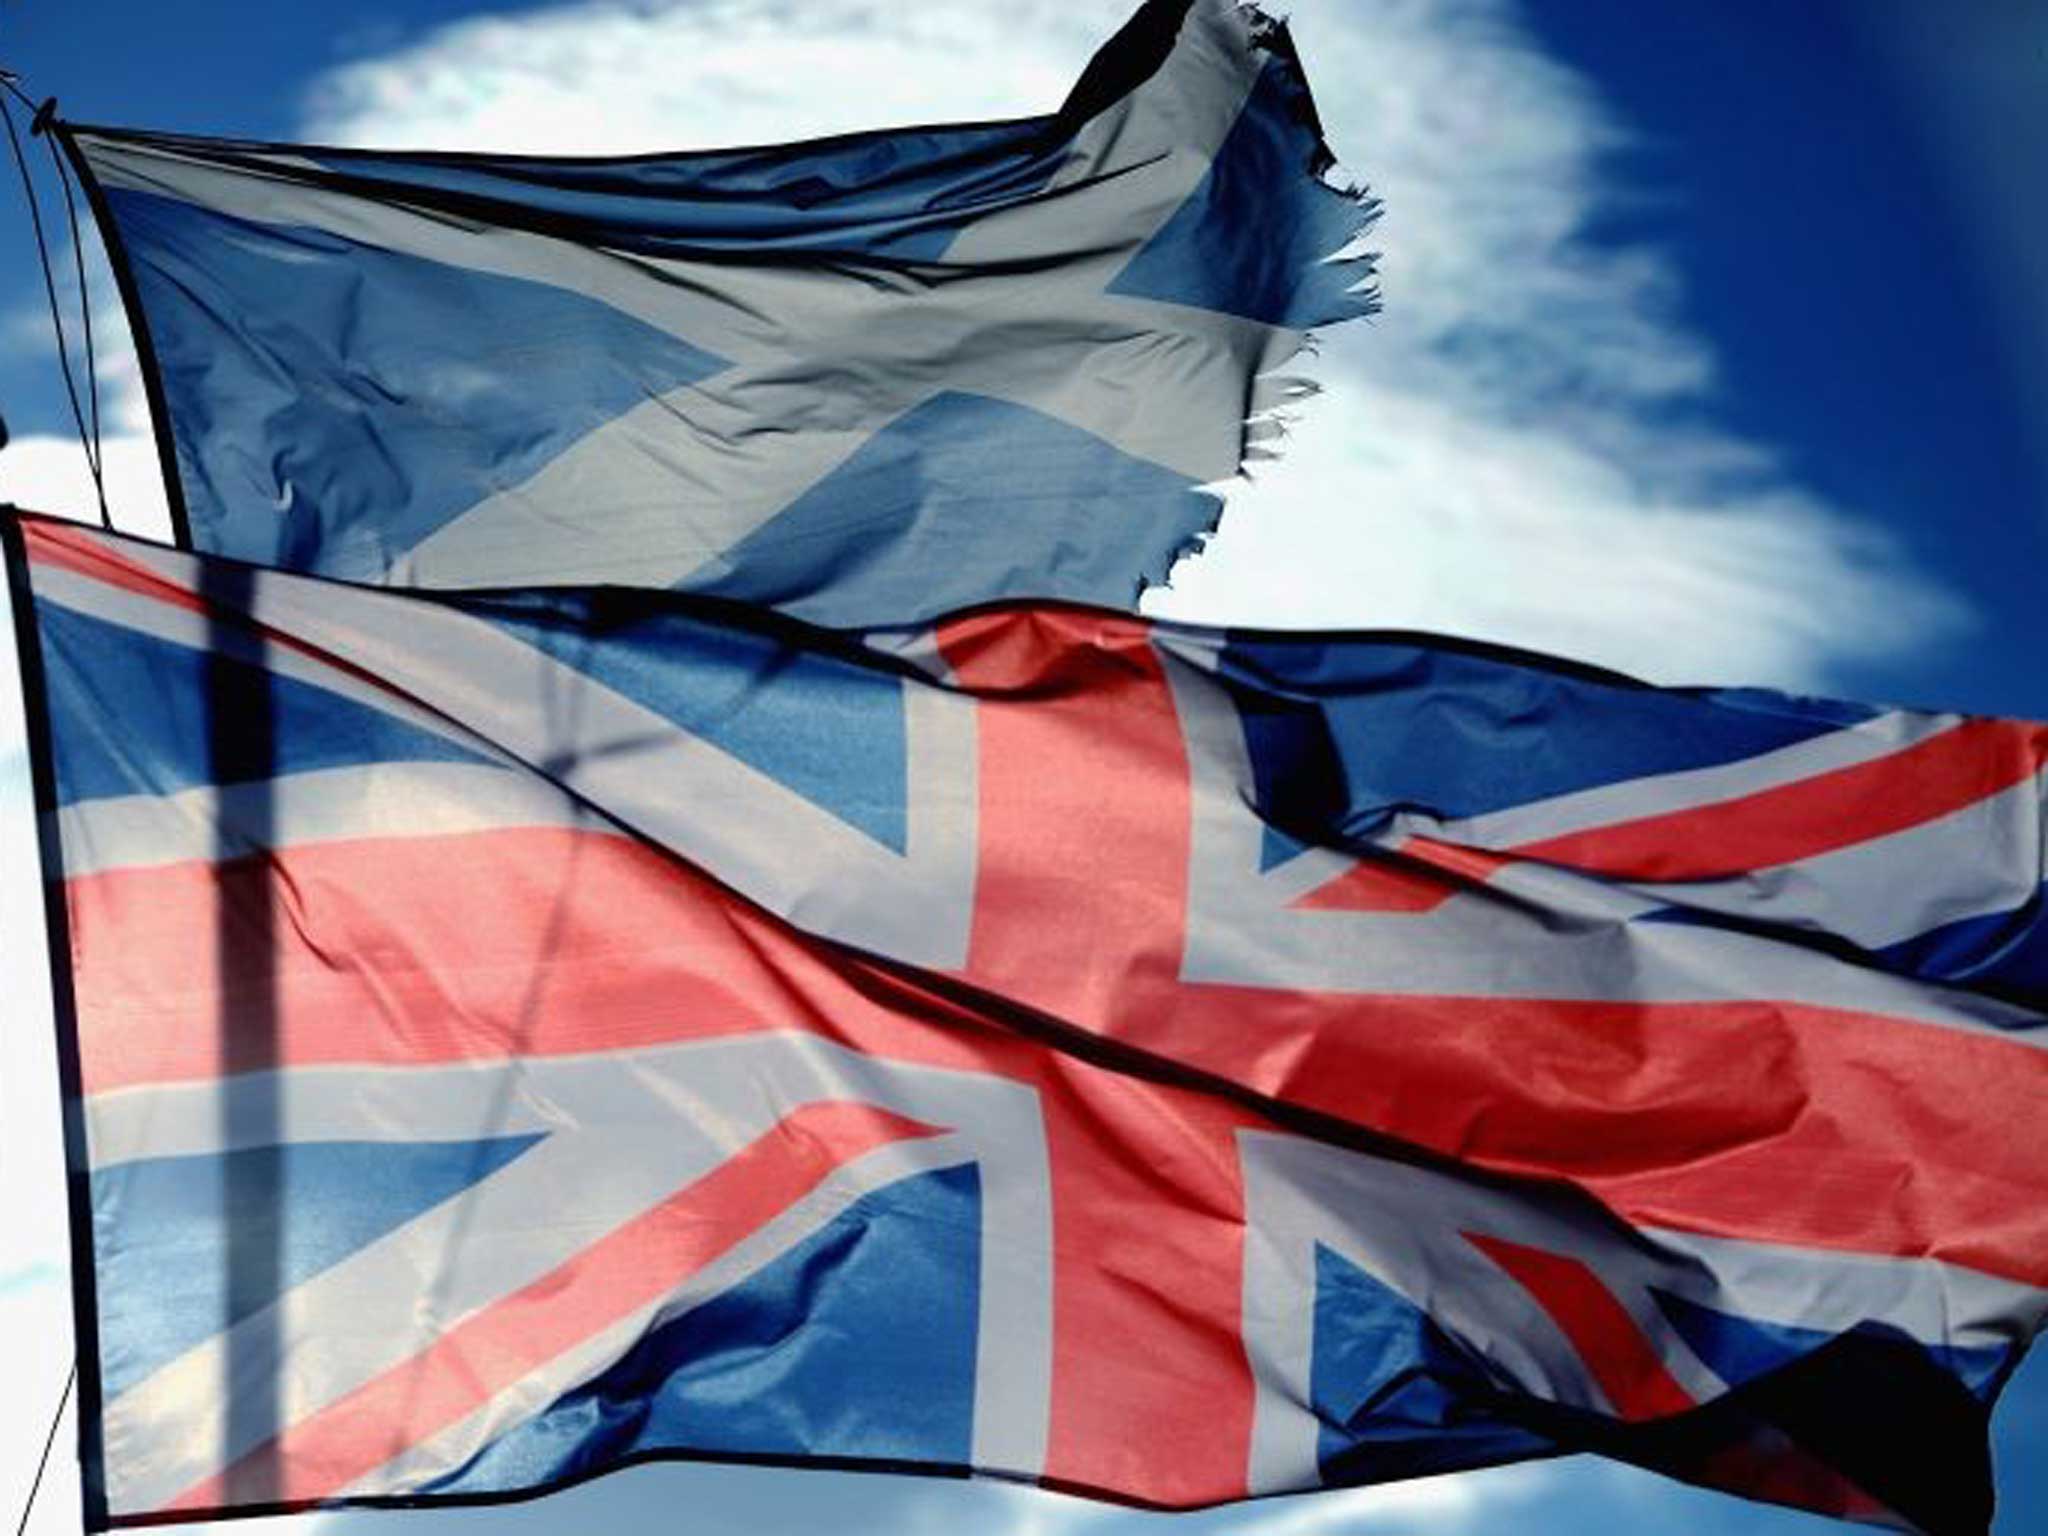 Support for independence is growing, according to polls